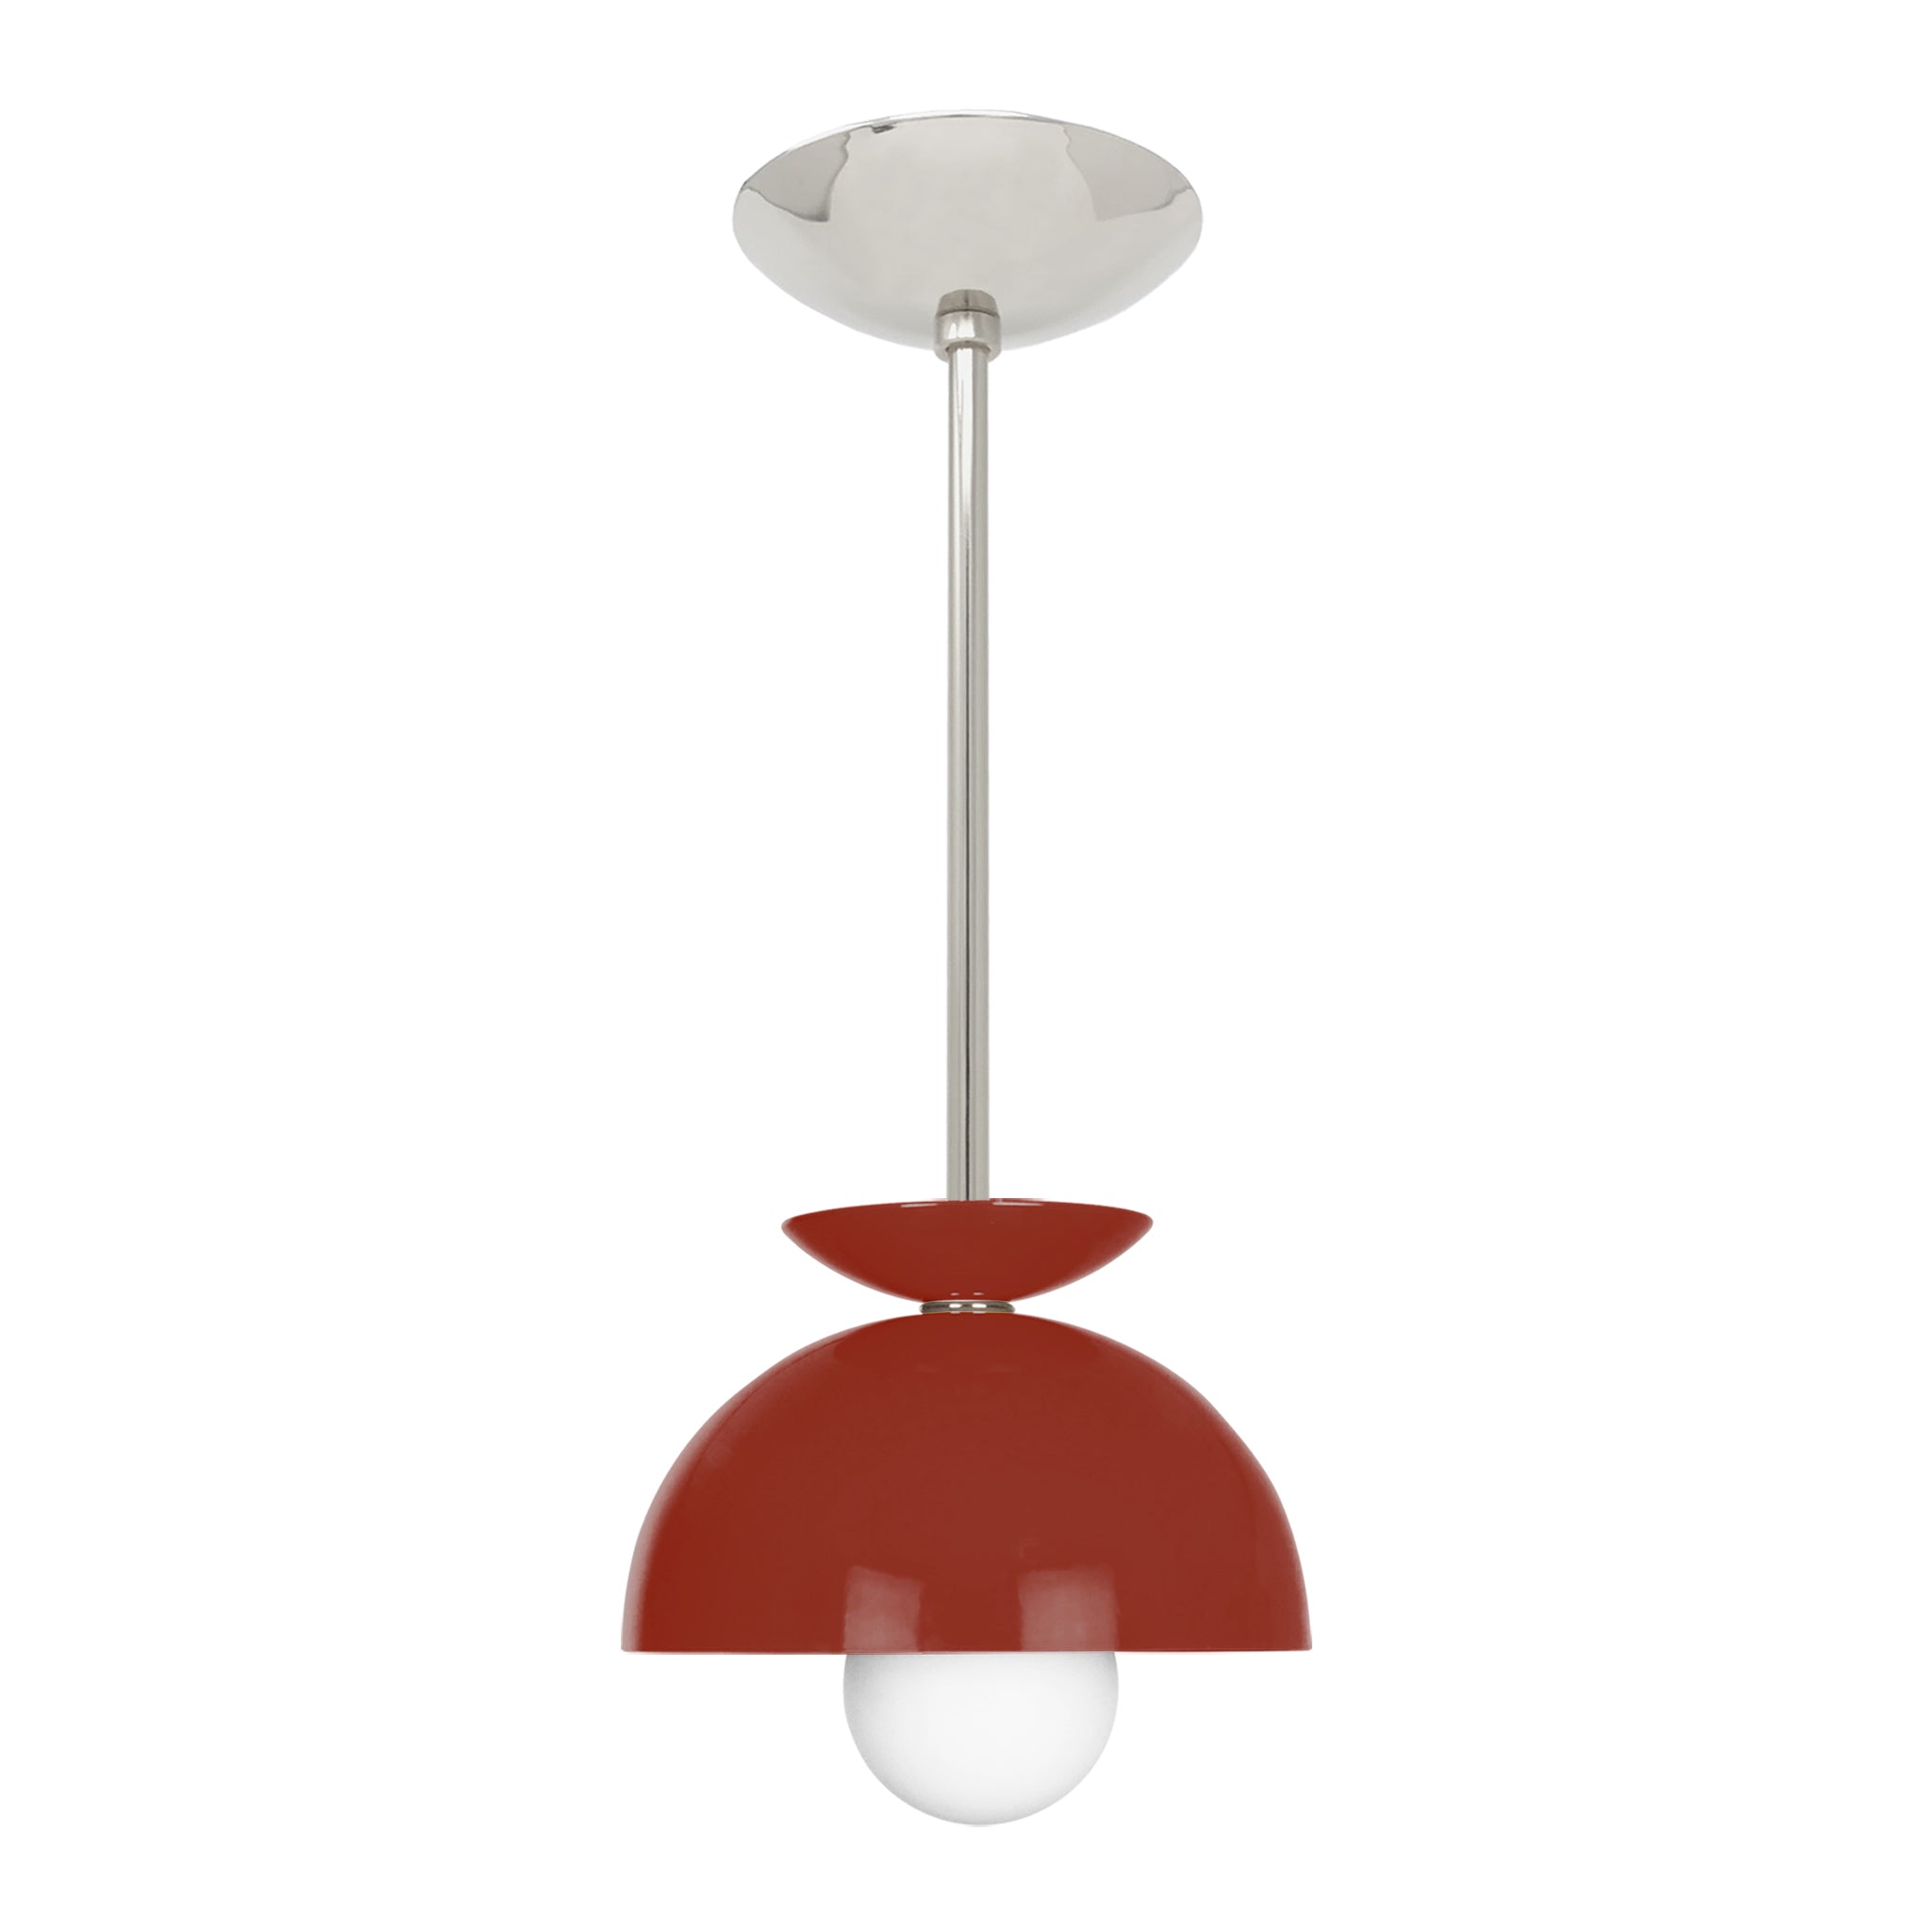 Nickel and riding hood red color Echo pendant 8" Dutton Brown lighting